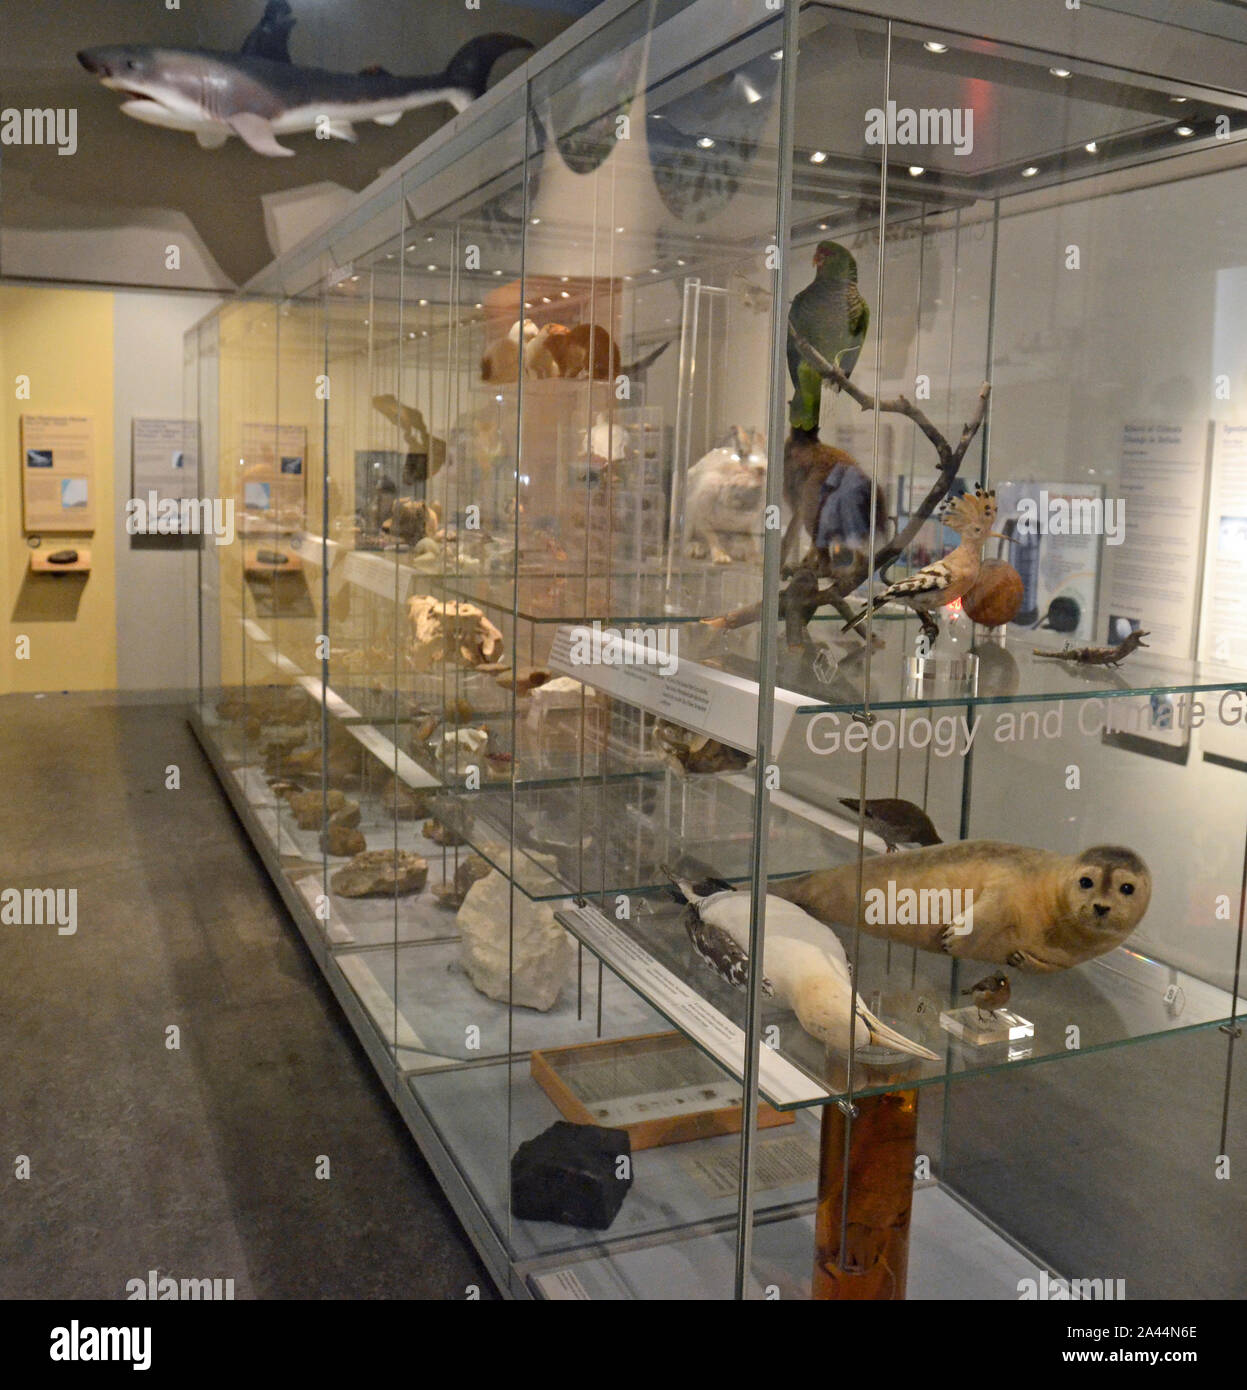 Geology and Climate Gallery, displaying coastal wildlife and rocks, inside the Natural History Museum, Colchester, UK Stock Photo